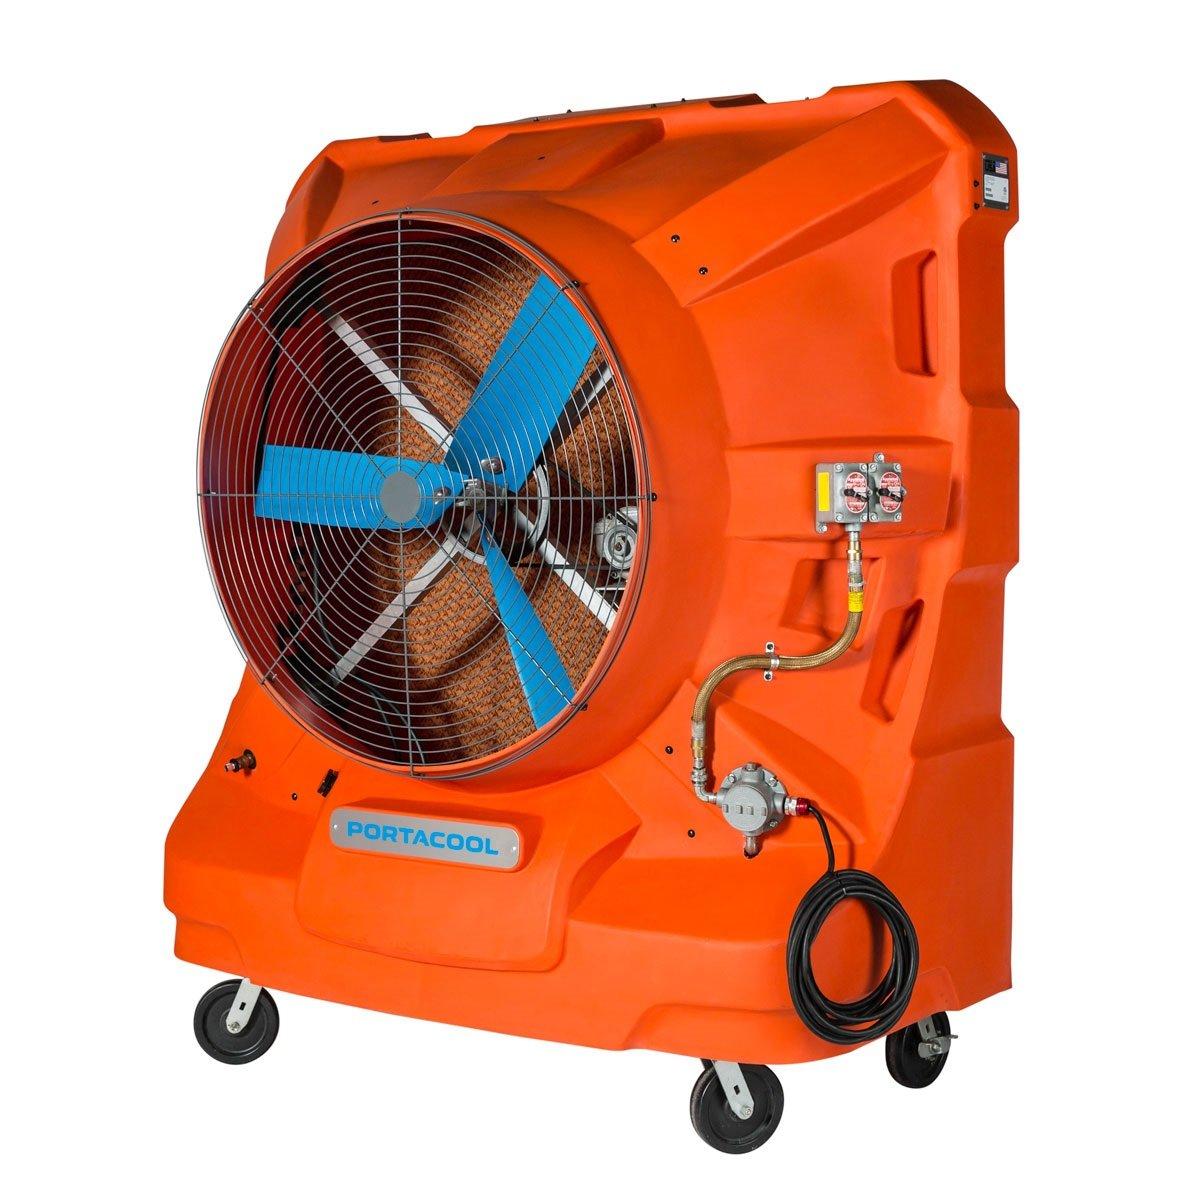 explosion-proof-fans-and-blowers-explosion-proof-evaporative-cooler-fans.jpg